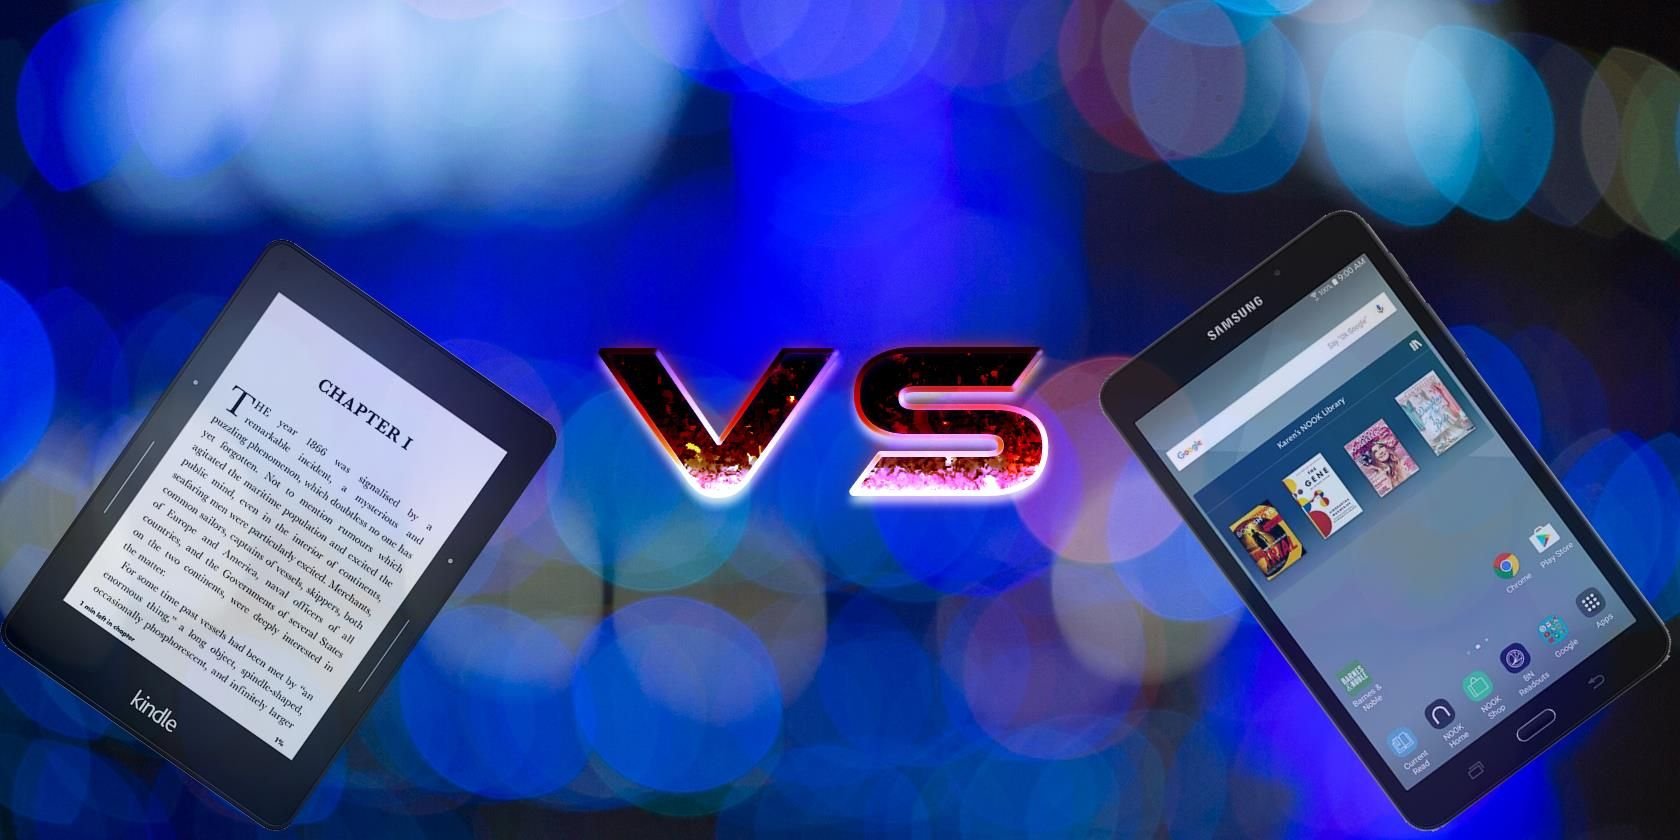 Nook vs. Kindle: Which Ebook Reader Is Best for You?